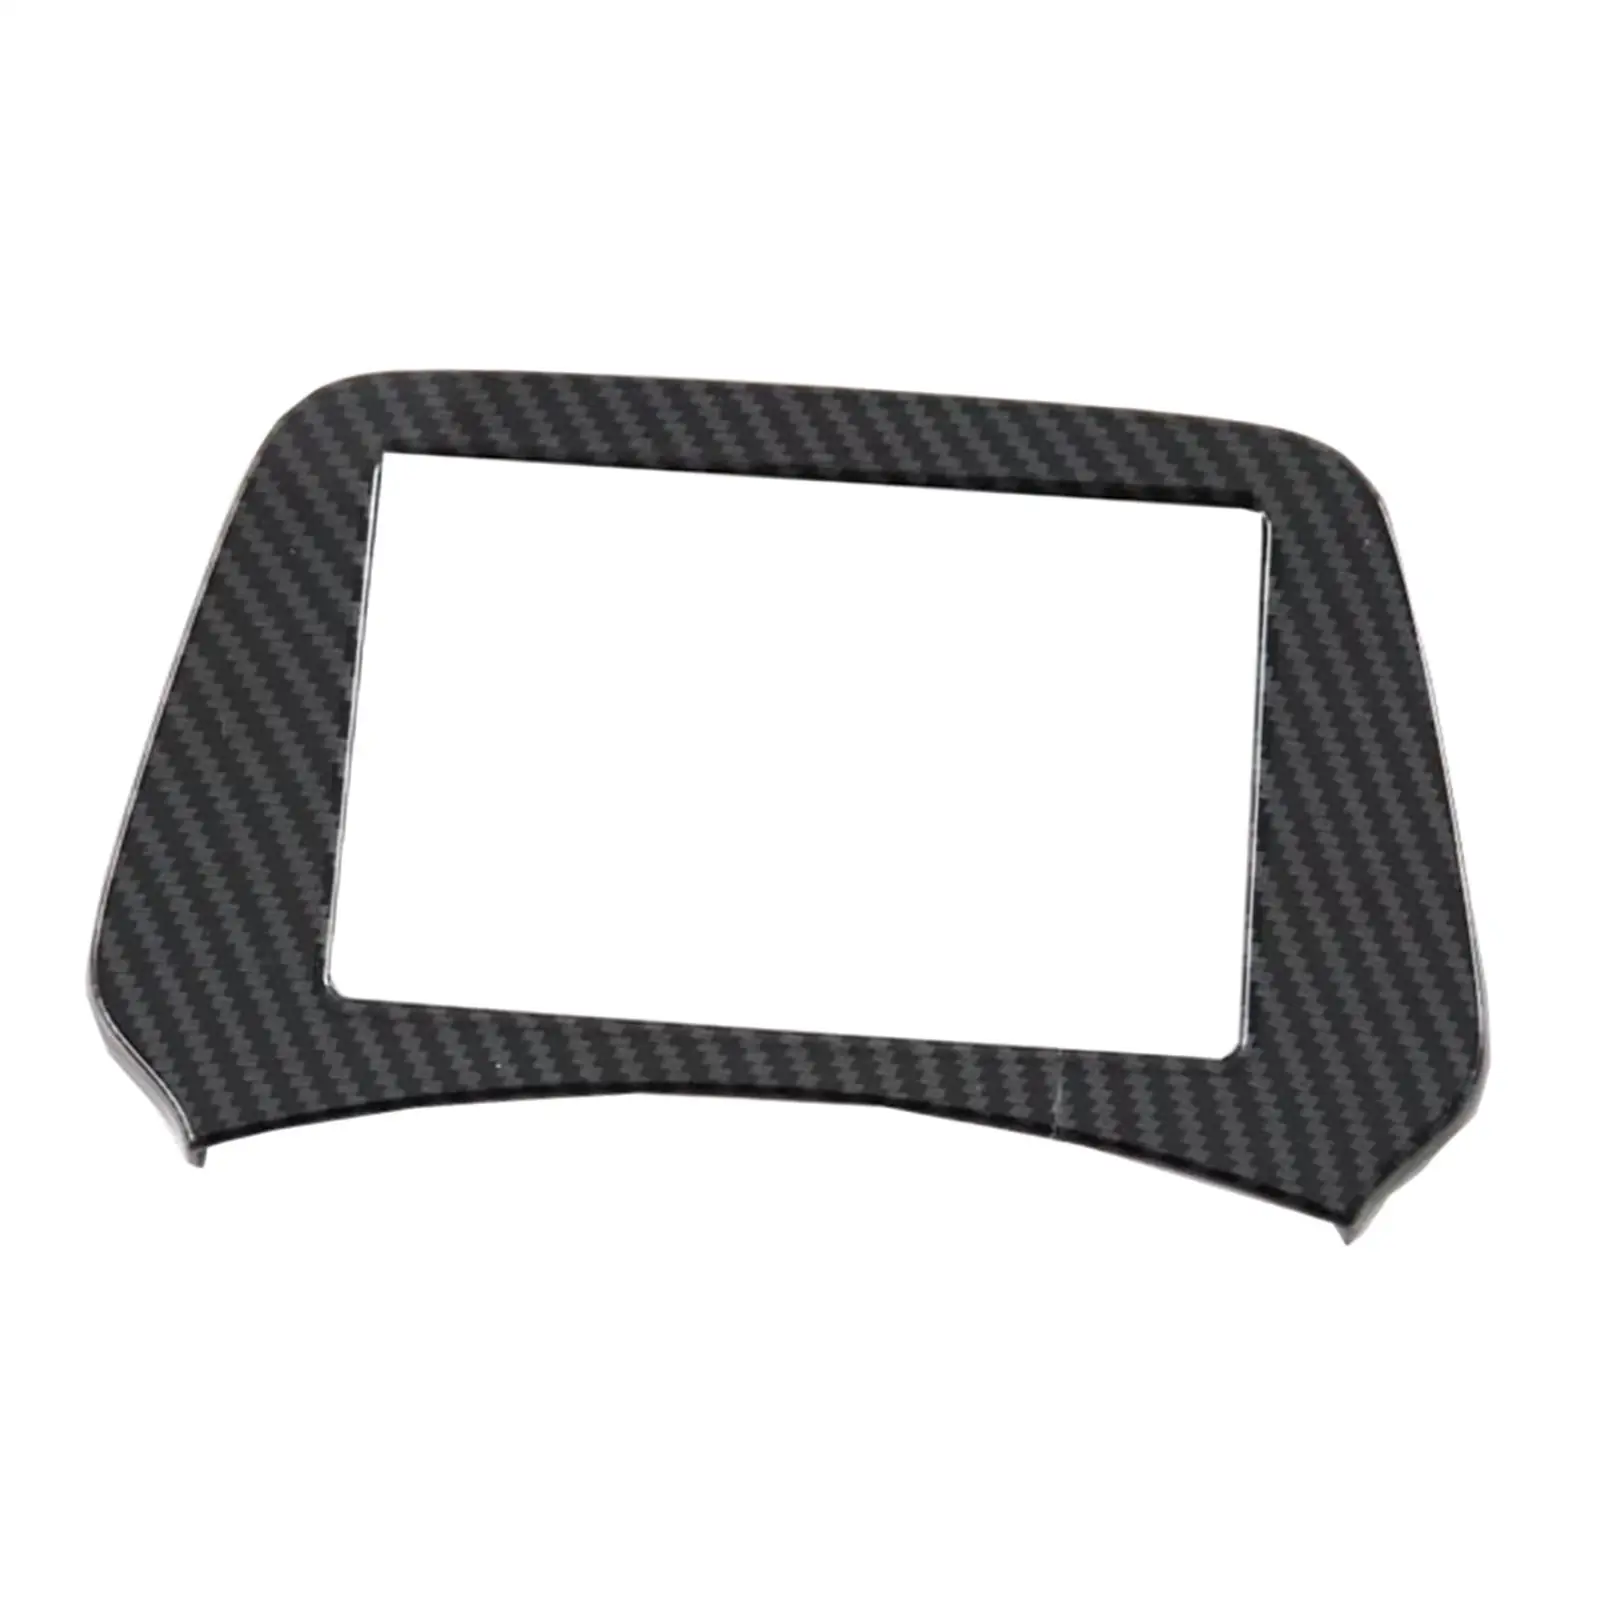 Dial Dashboard Trim Cover Frame Professional Replaces for Byd Yuan Plus